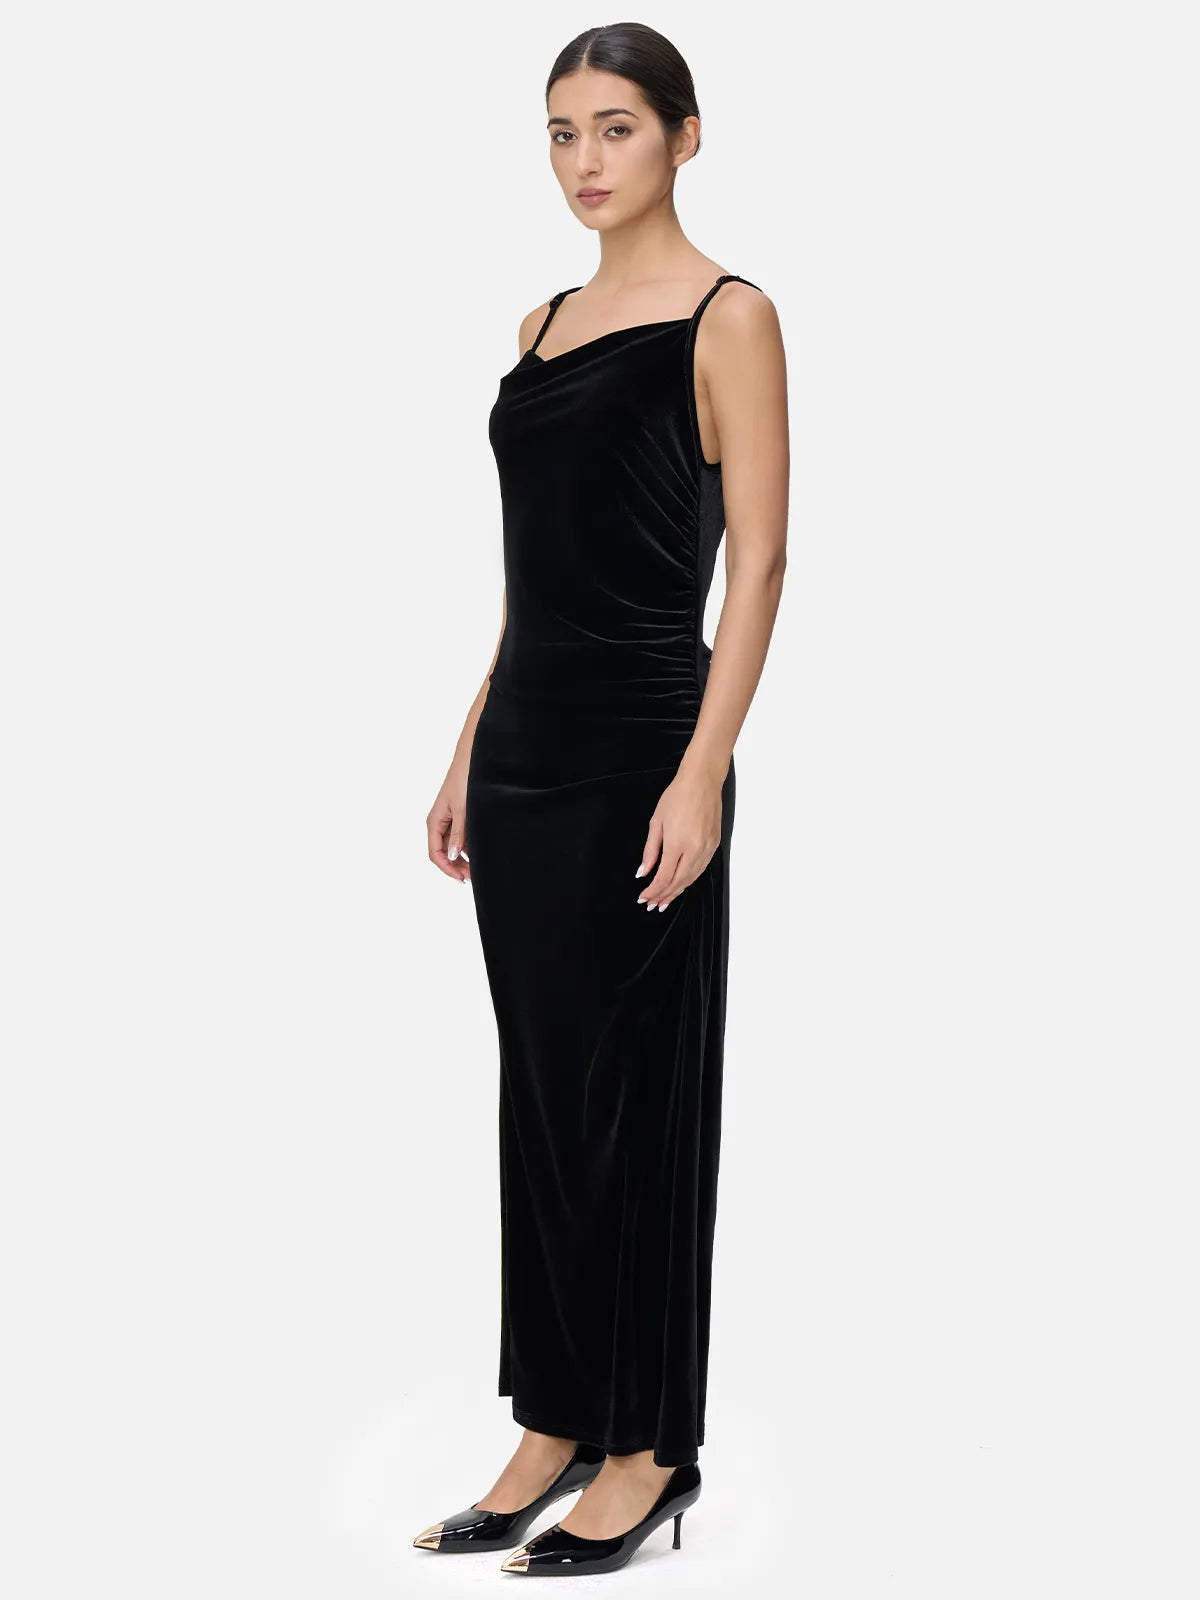 Luxurious and sophisticated velvet spaghetti strap maxi dress with irregular V-neck design, featuring a fluid layered effect